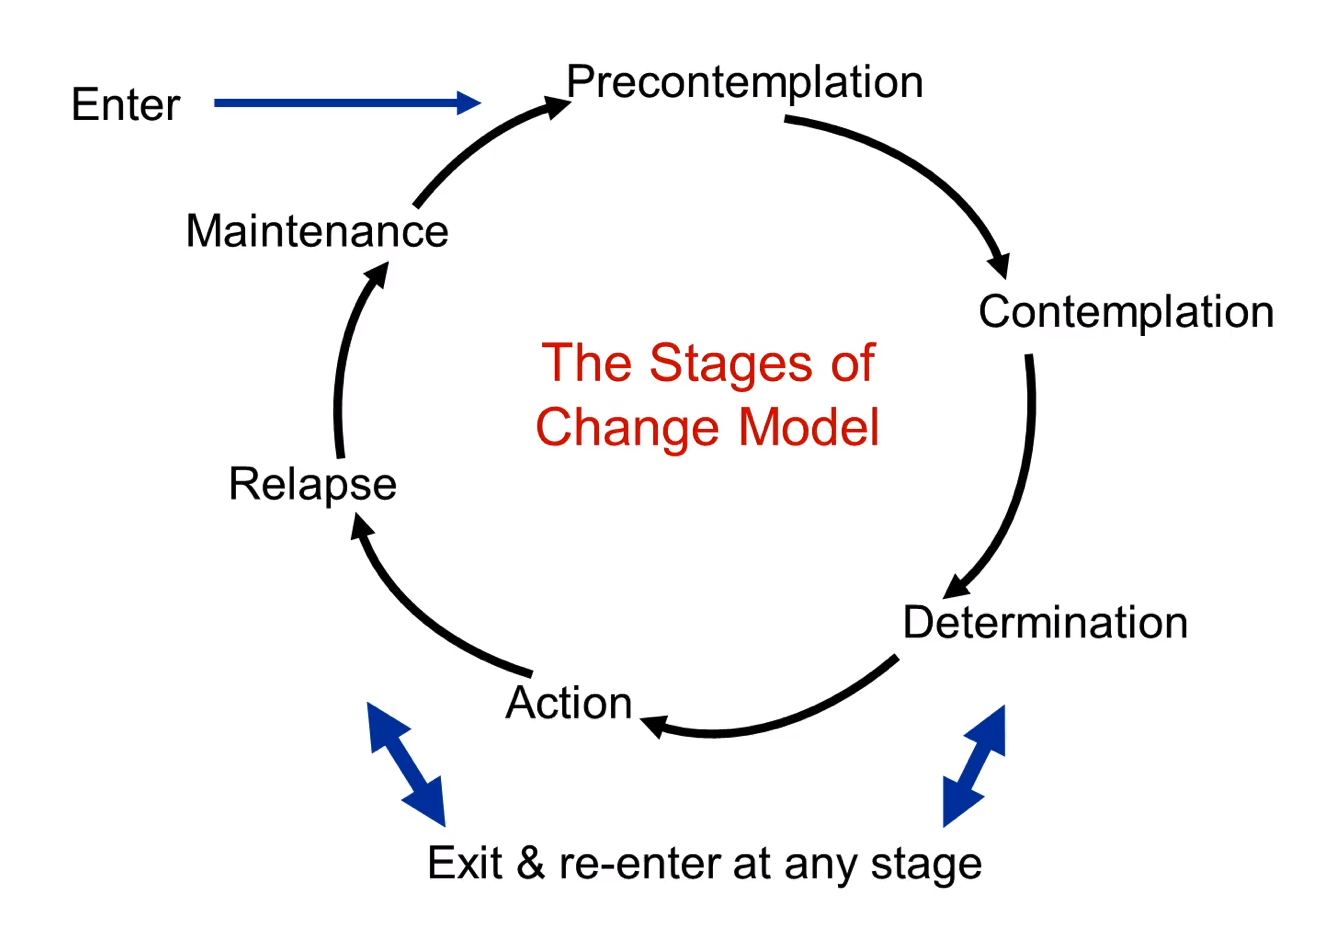 The Stages of Change Model as applied to customer psychology in ecommerce